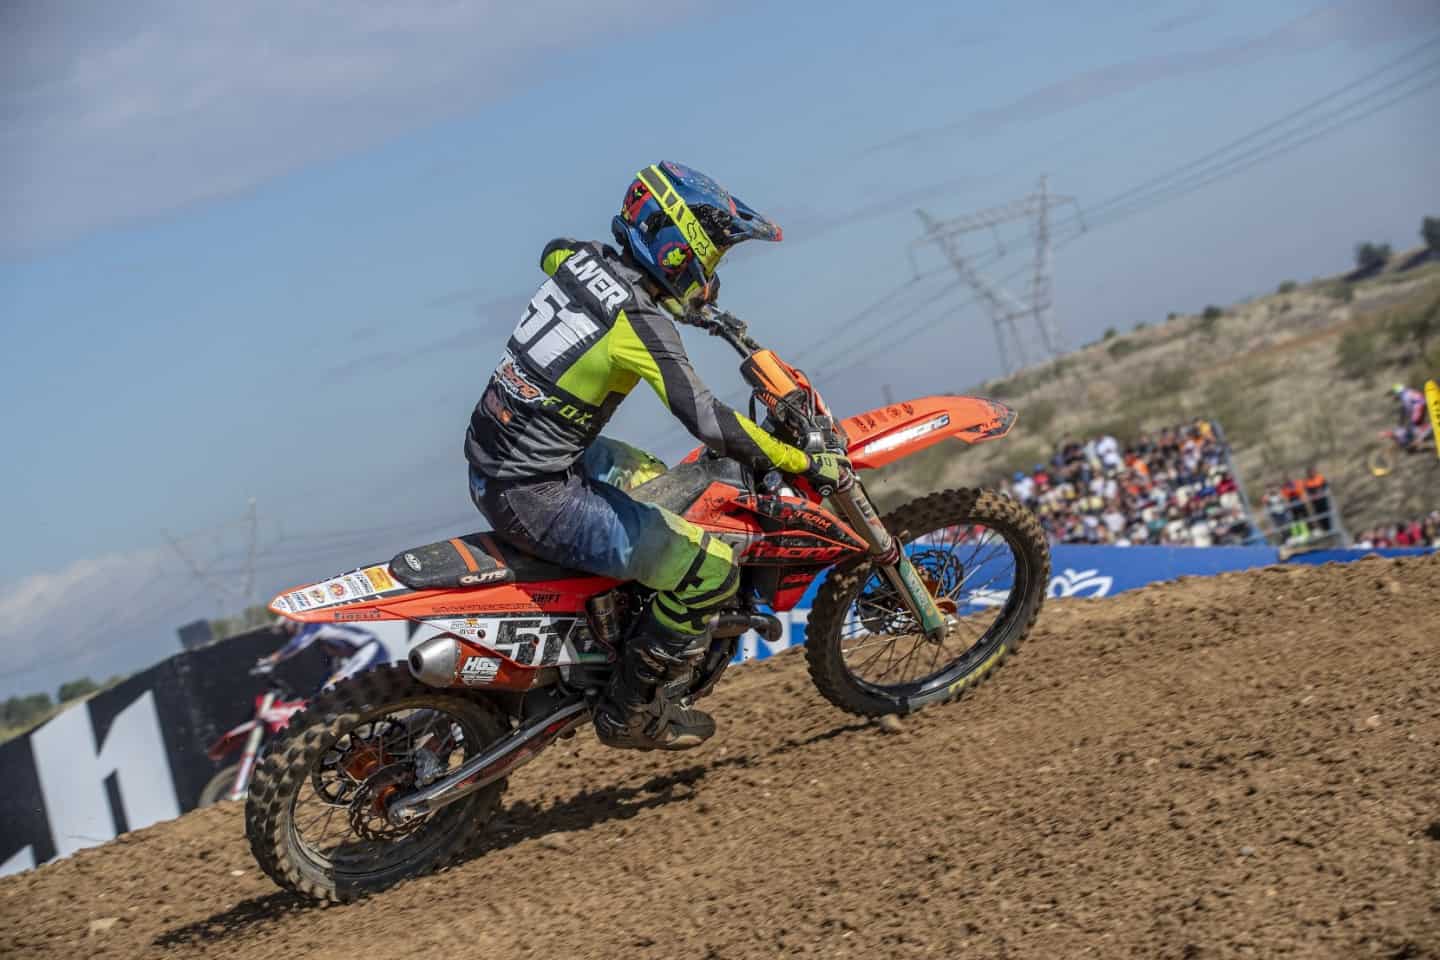 PM WZ Racing - MXGP of Spain - Oriol Oliver 2